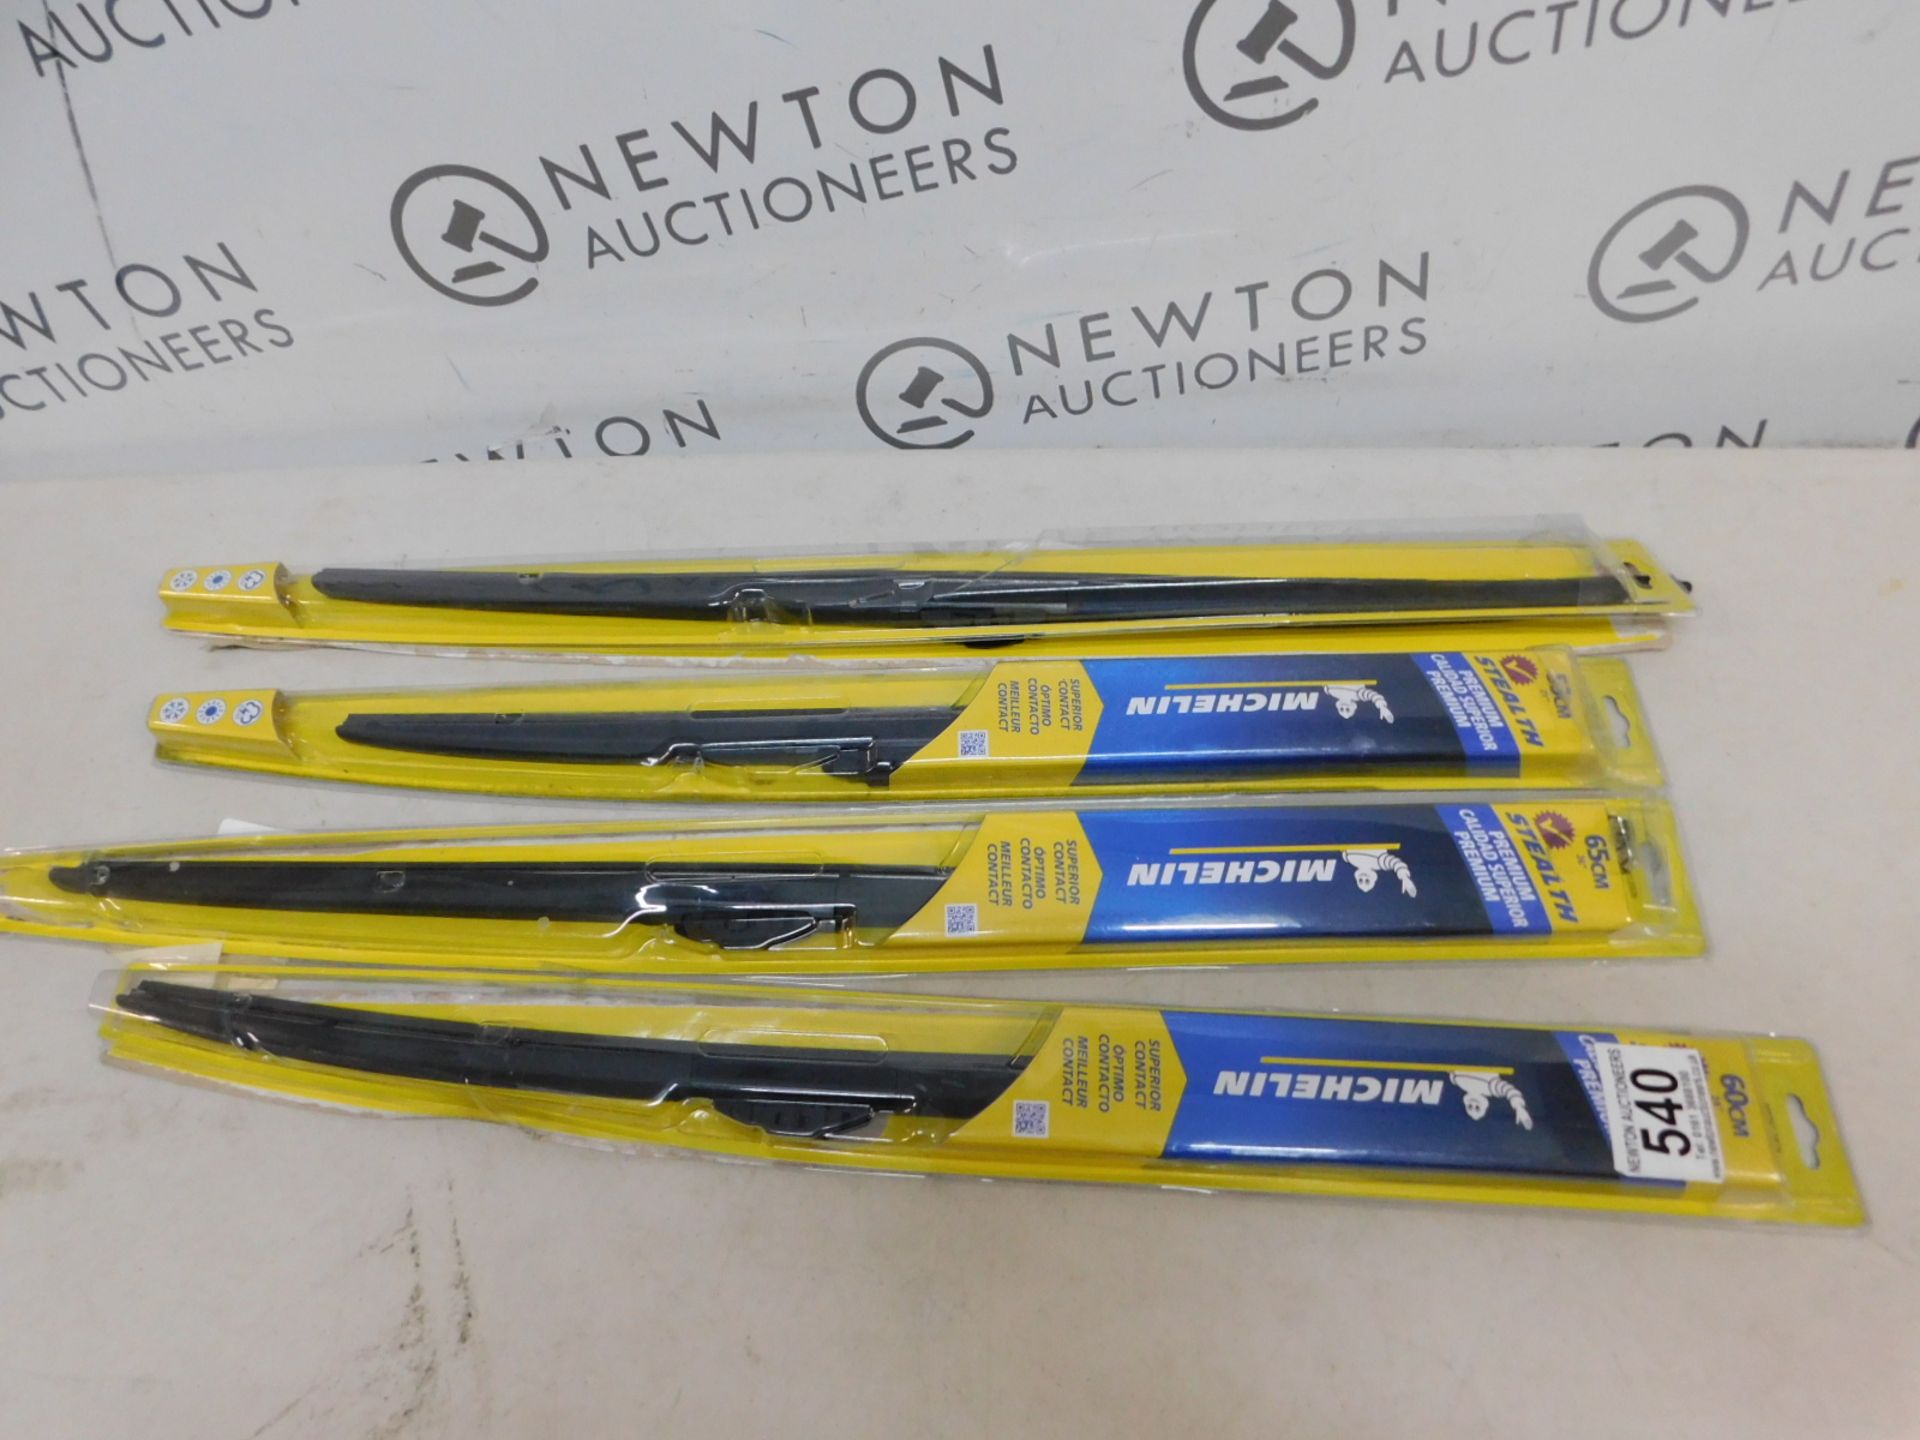 4 PACKS OF MICHELIN STEALTH WIPER BLADES IN VARIOUS SIZES RRP Â£49.99